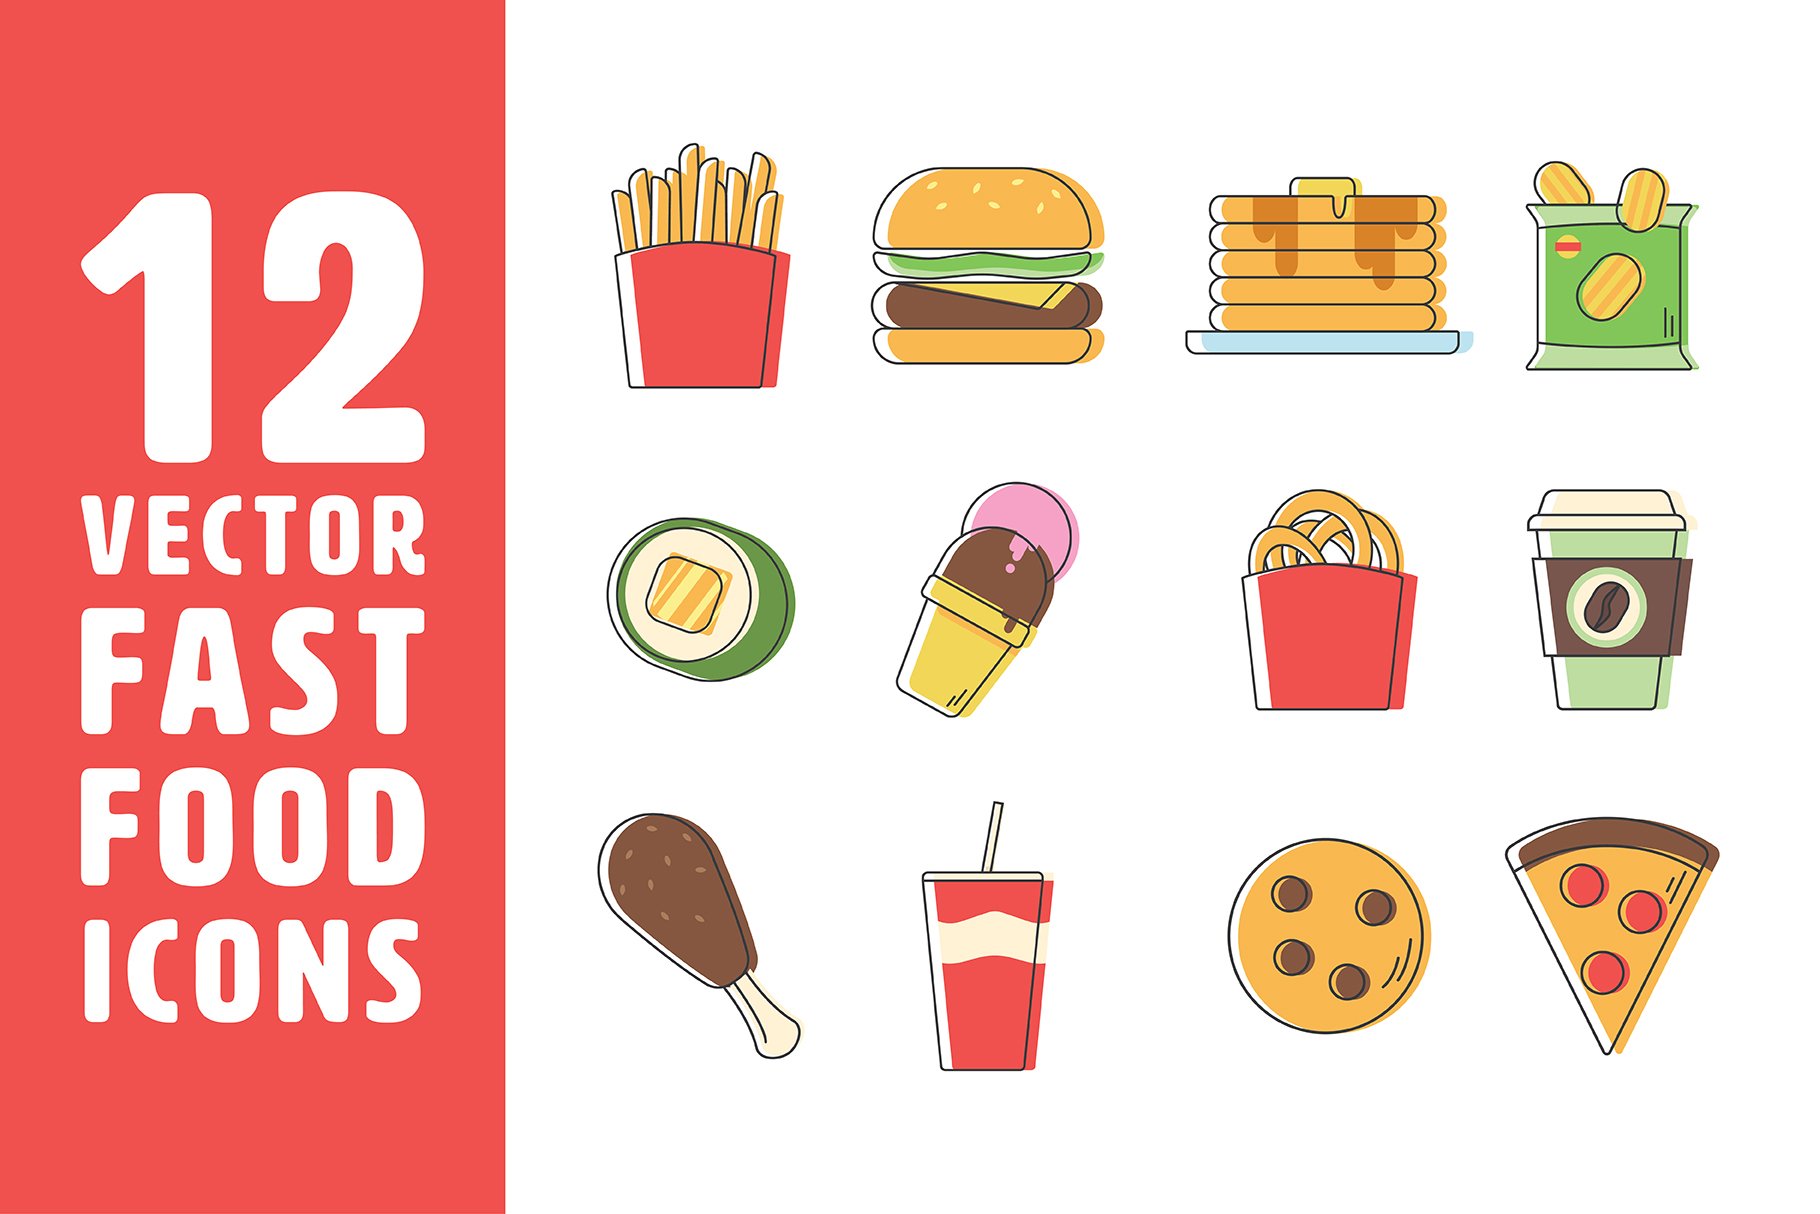 12 Vector Fast Food Icons cover image.